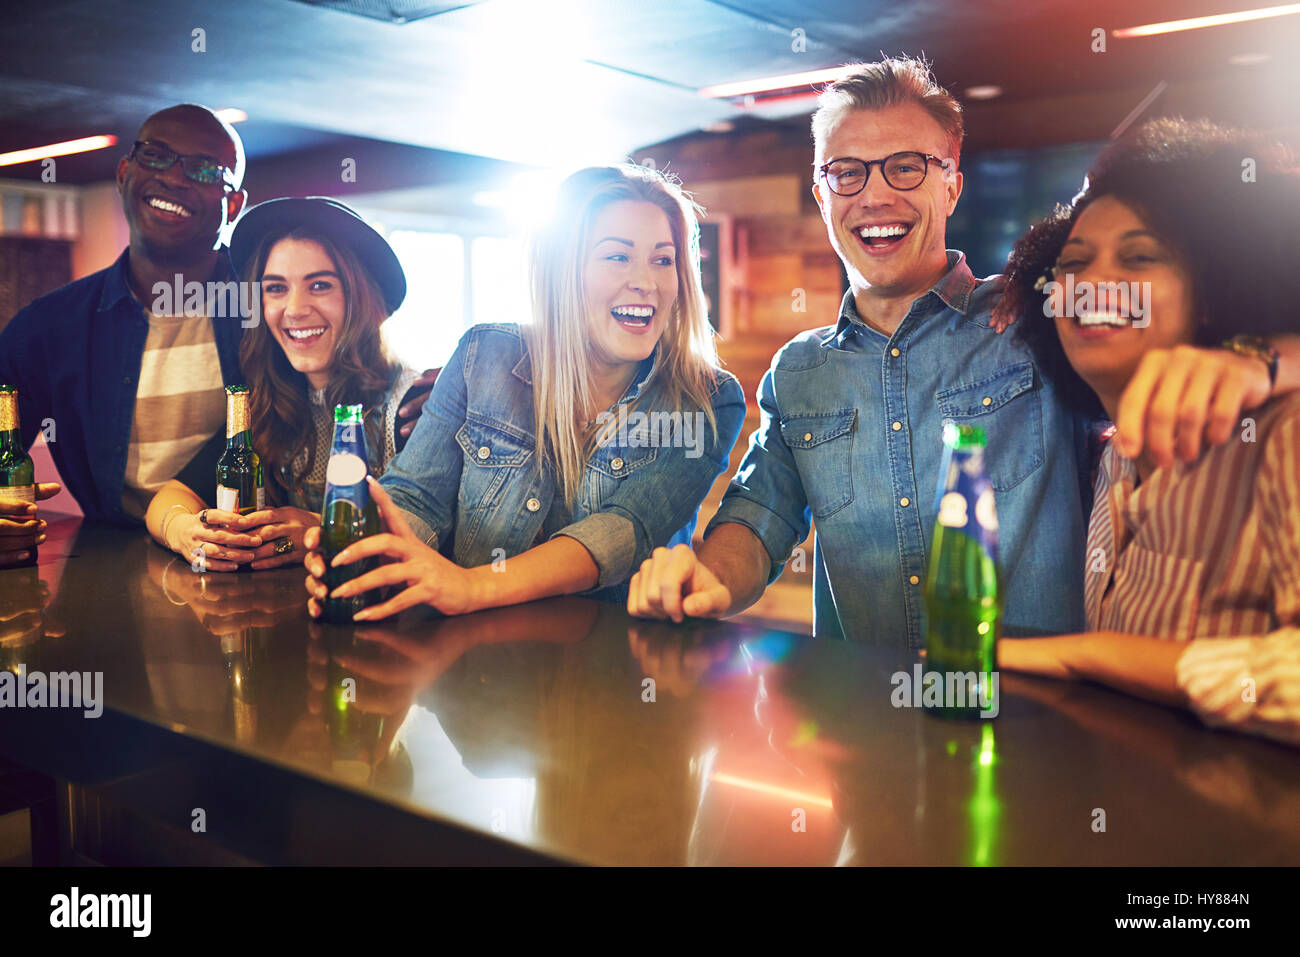 Smiley friendly people in the bar with a beer looking at camera. Friends and fun concept. Stock Photo